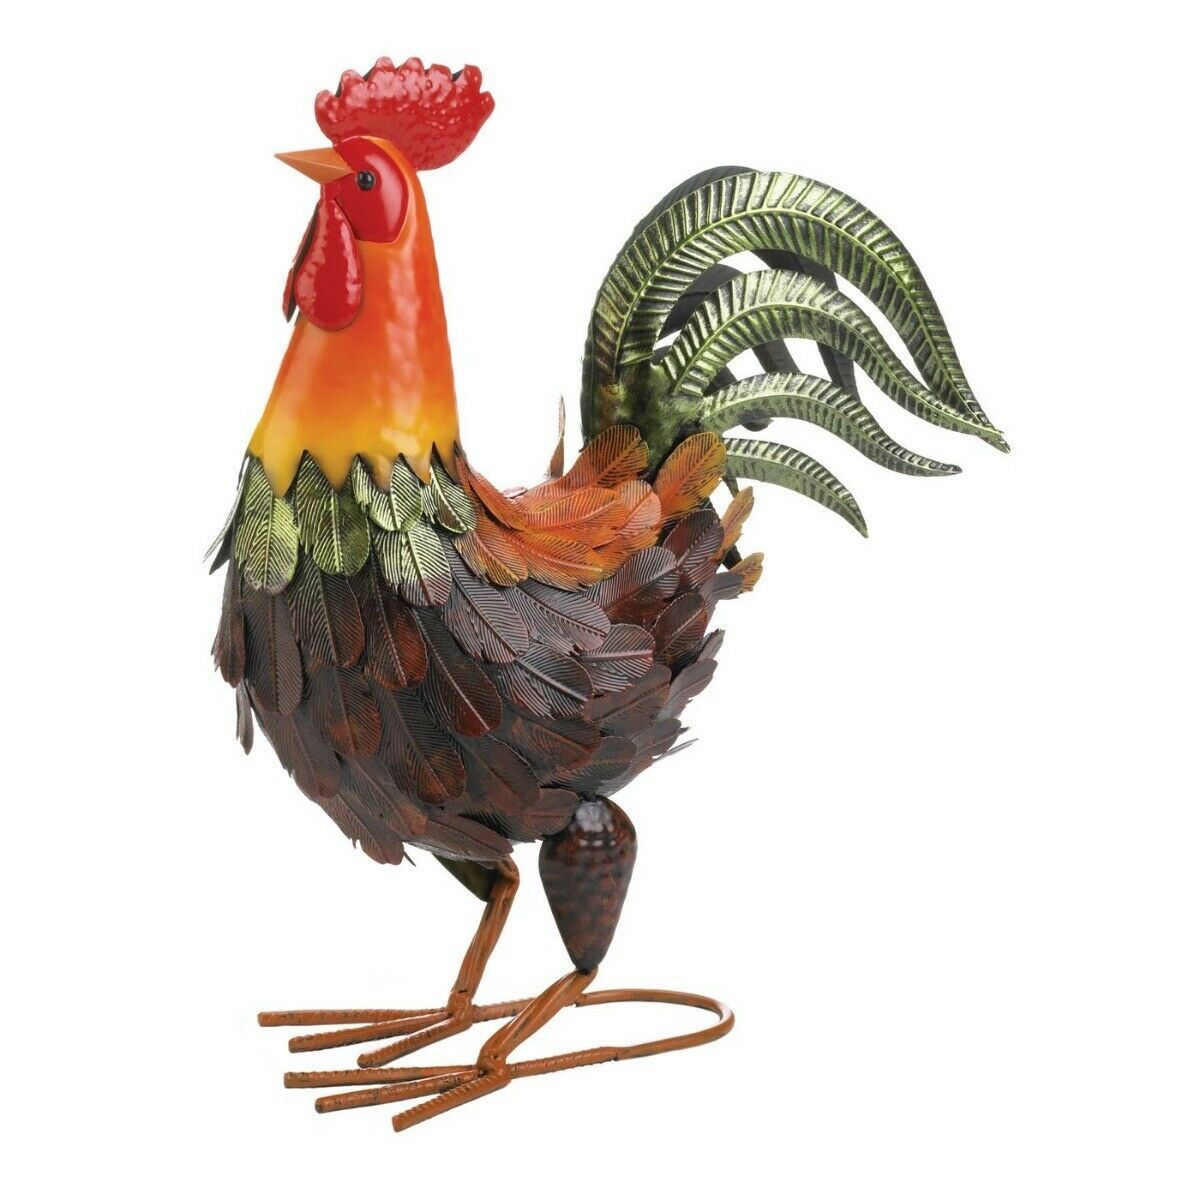 Colorful Farmhouse Rooster Garden Statue 15" High - $47.95